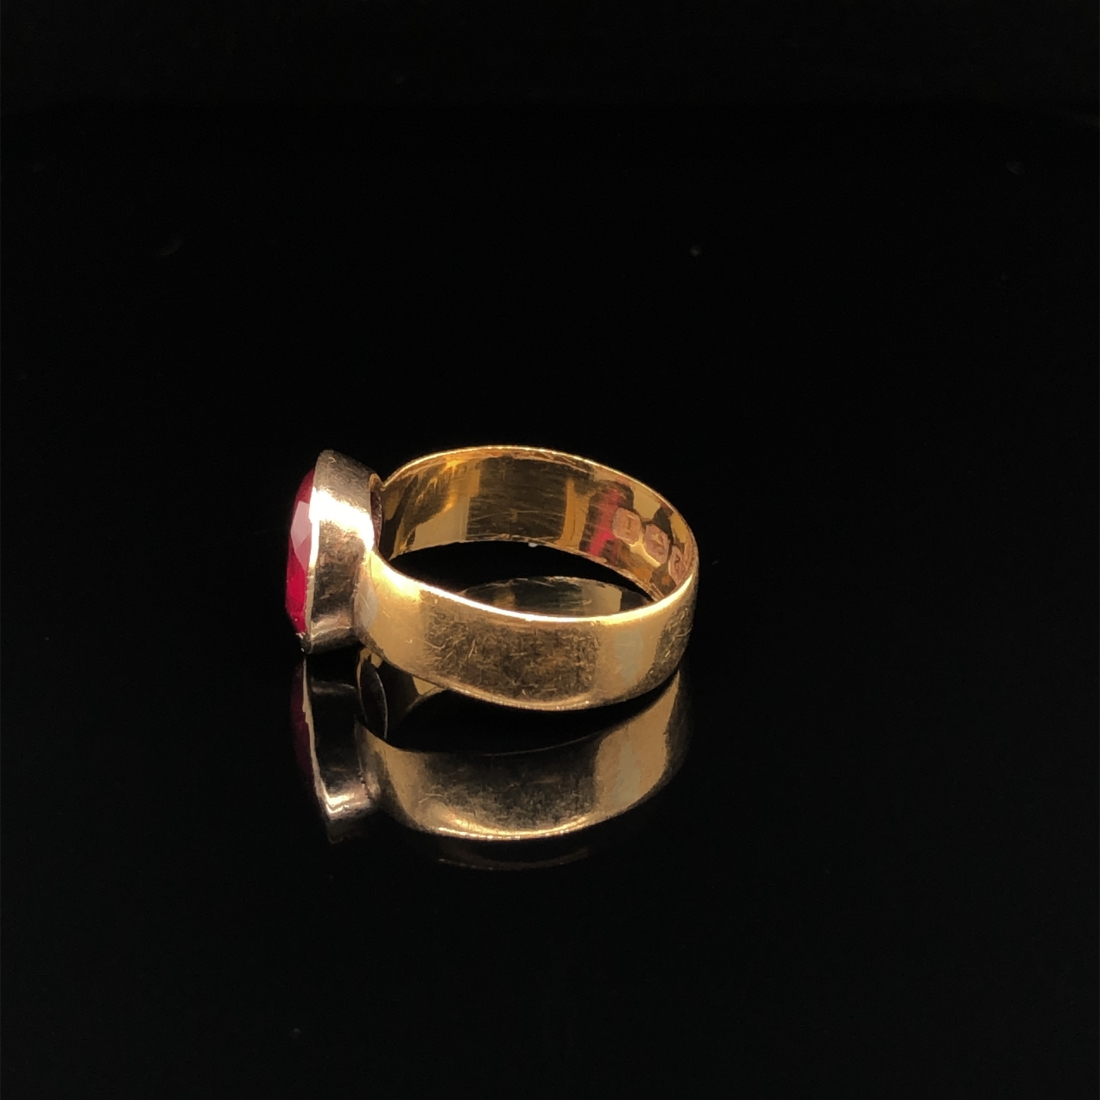 AN ANTIQUE 22ct HALLMARKED GOLD GEMSET RING, WITH A 10ct GOLD SETTING. DATED 1908, BIRMINGHAM. - Image 4 of 10